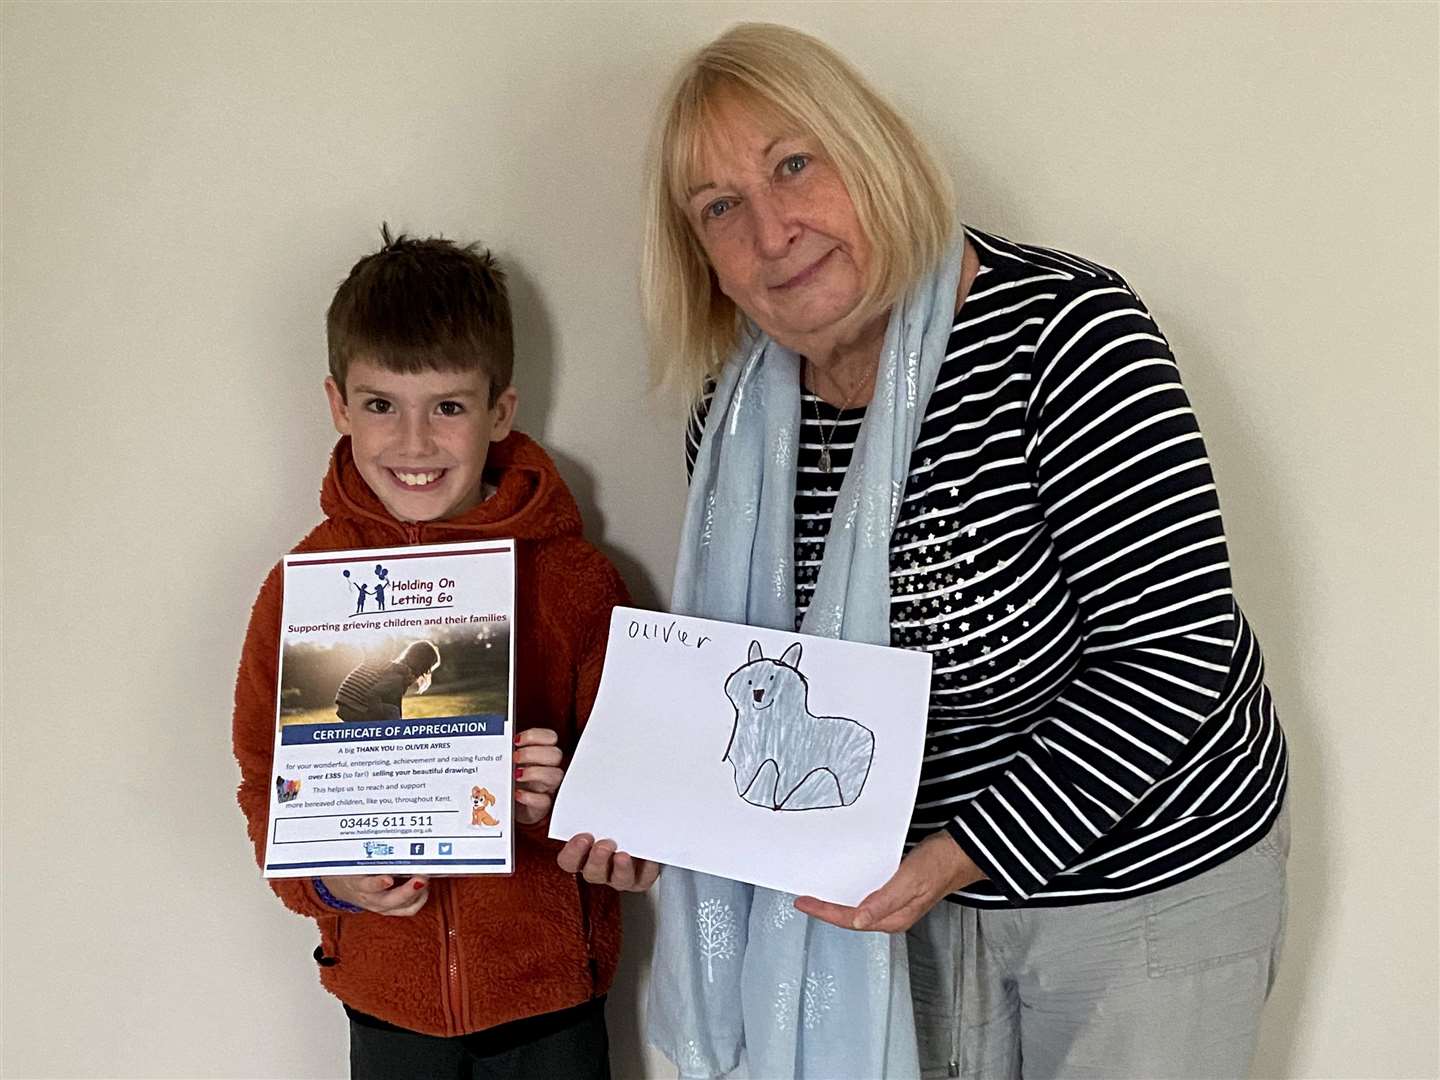 Debbie McSwiney, clinical lead from Holding on Letting Go, presented Oliver with a thank you certificate. Picture: HOLG